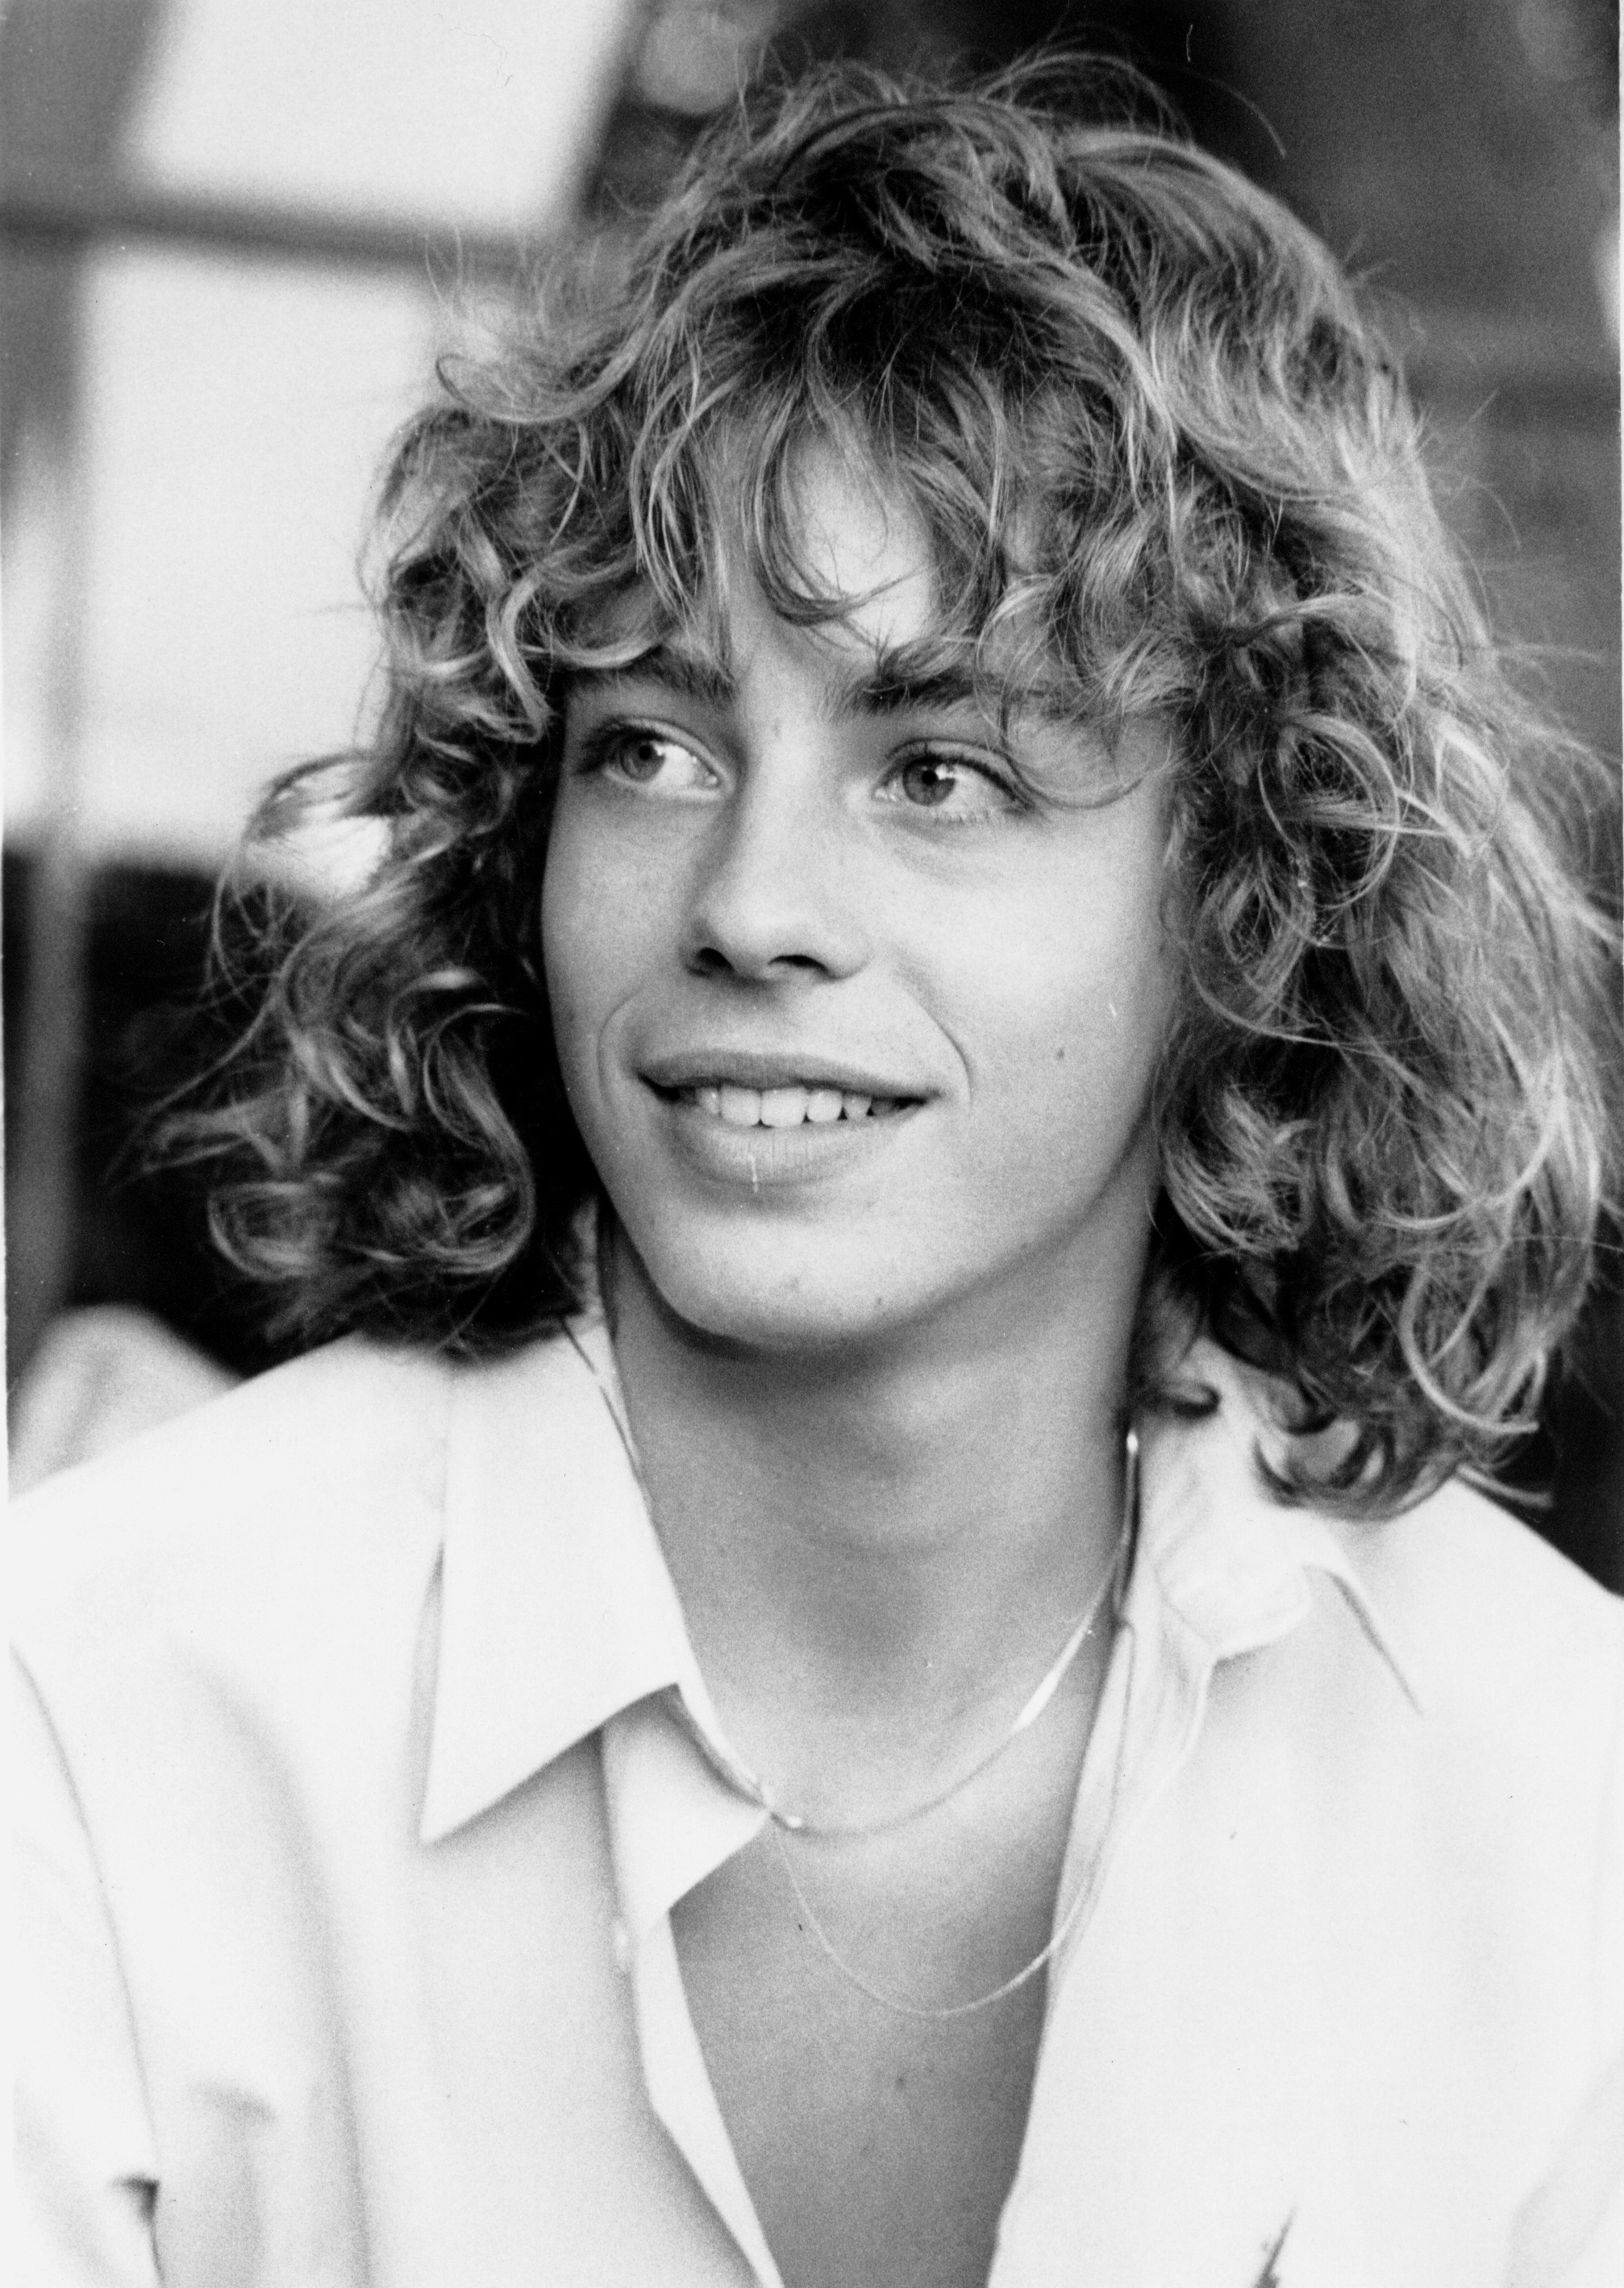 Leif Garrett during Music File Photos in the 1970s in Los Angeles | Source: Getty Images